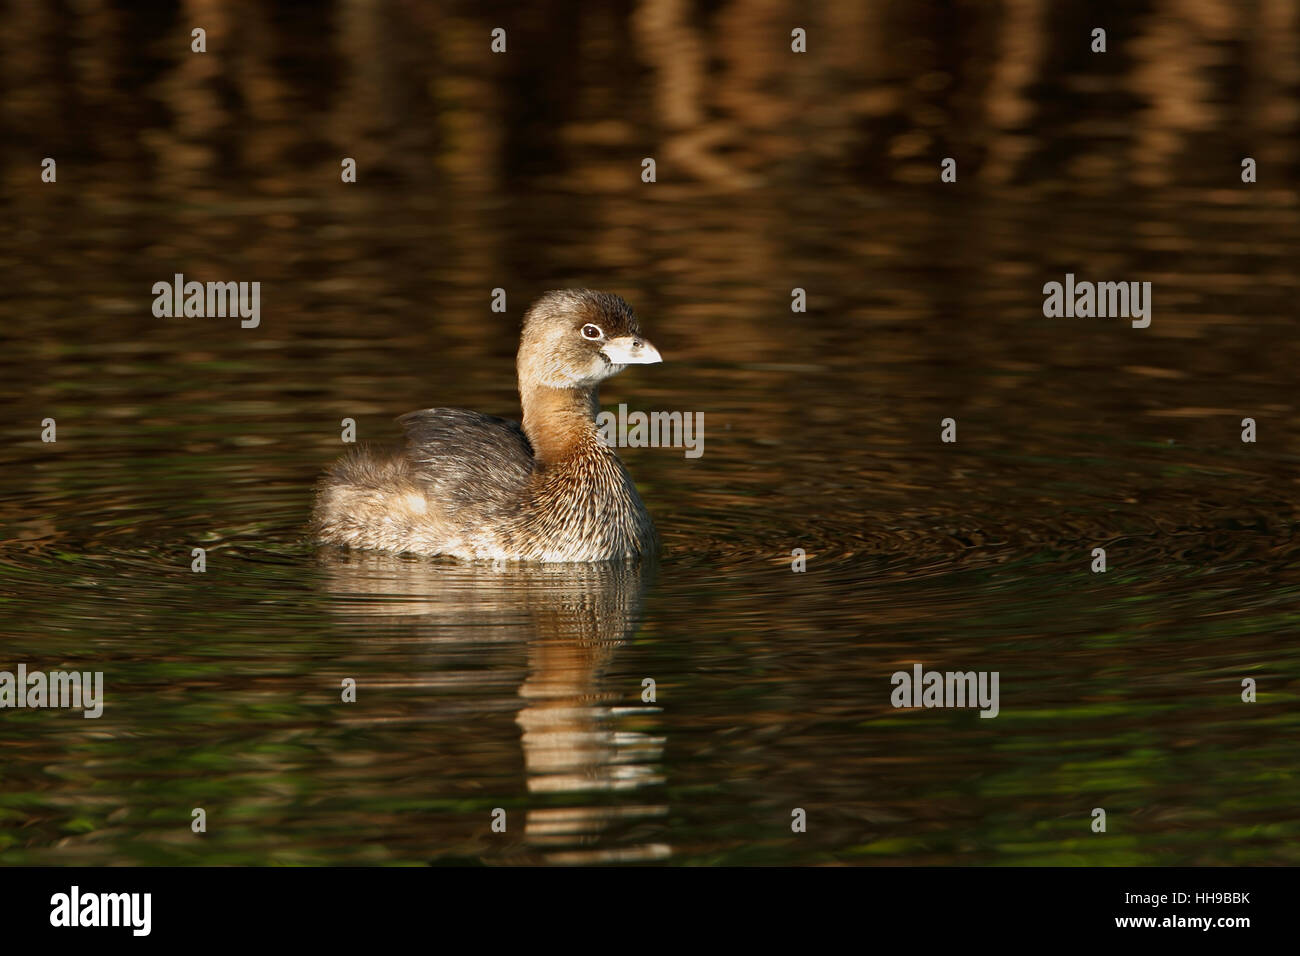 Pied-billed grebe (Podilymbus podiceps) in water in early morning light, Ding Darling NWR, Florida, USA Stock Photo